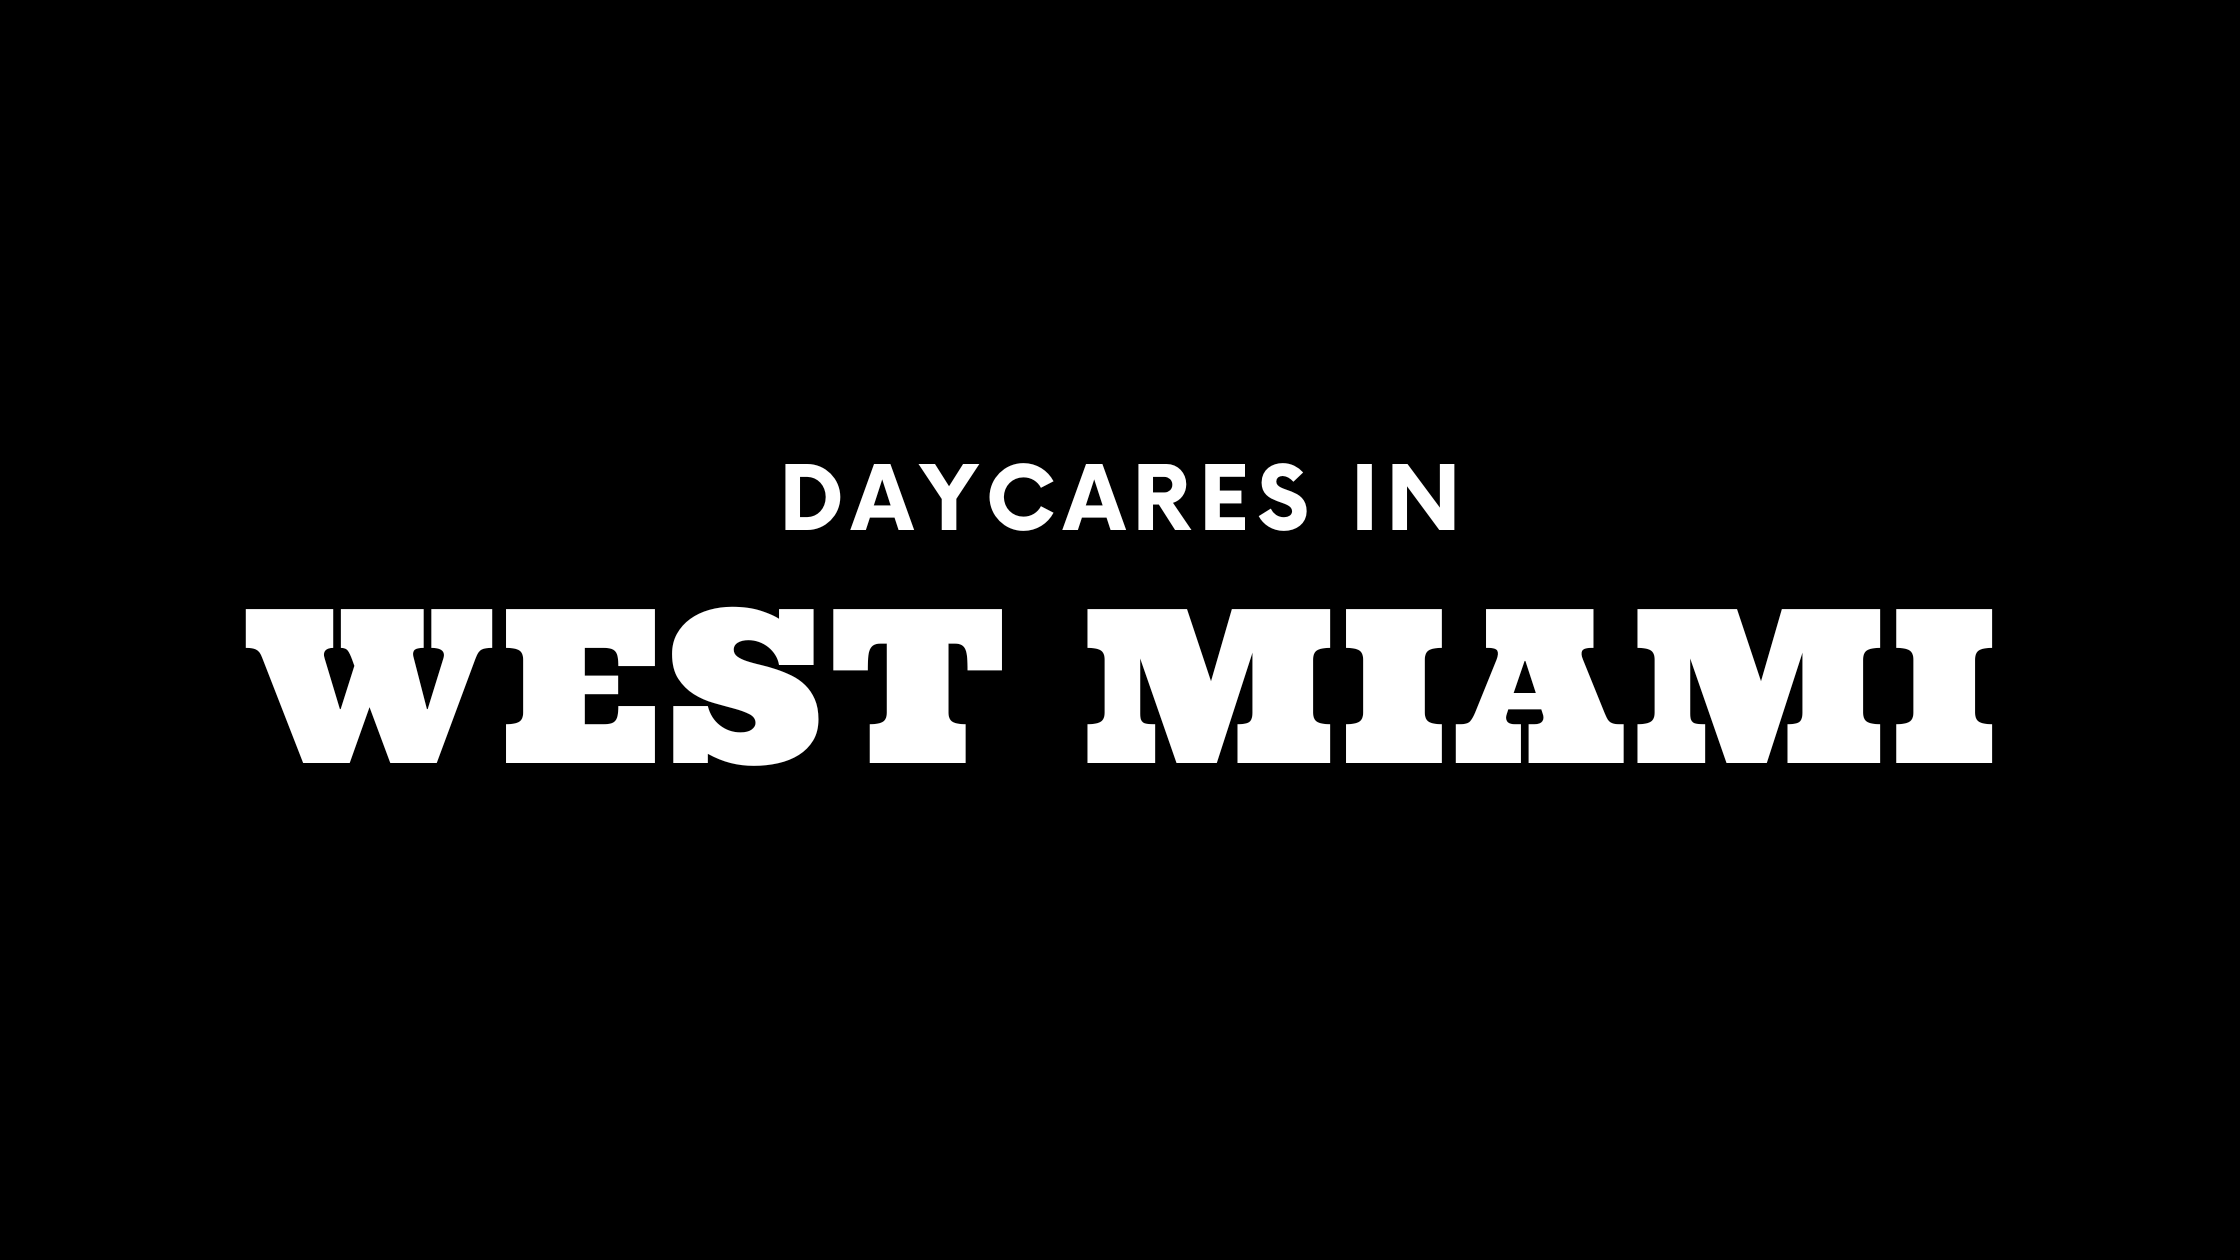 Daycares in West Miami